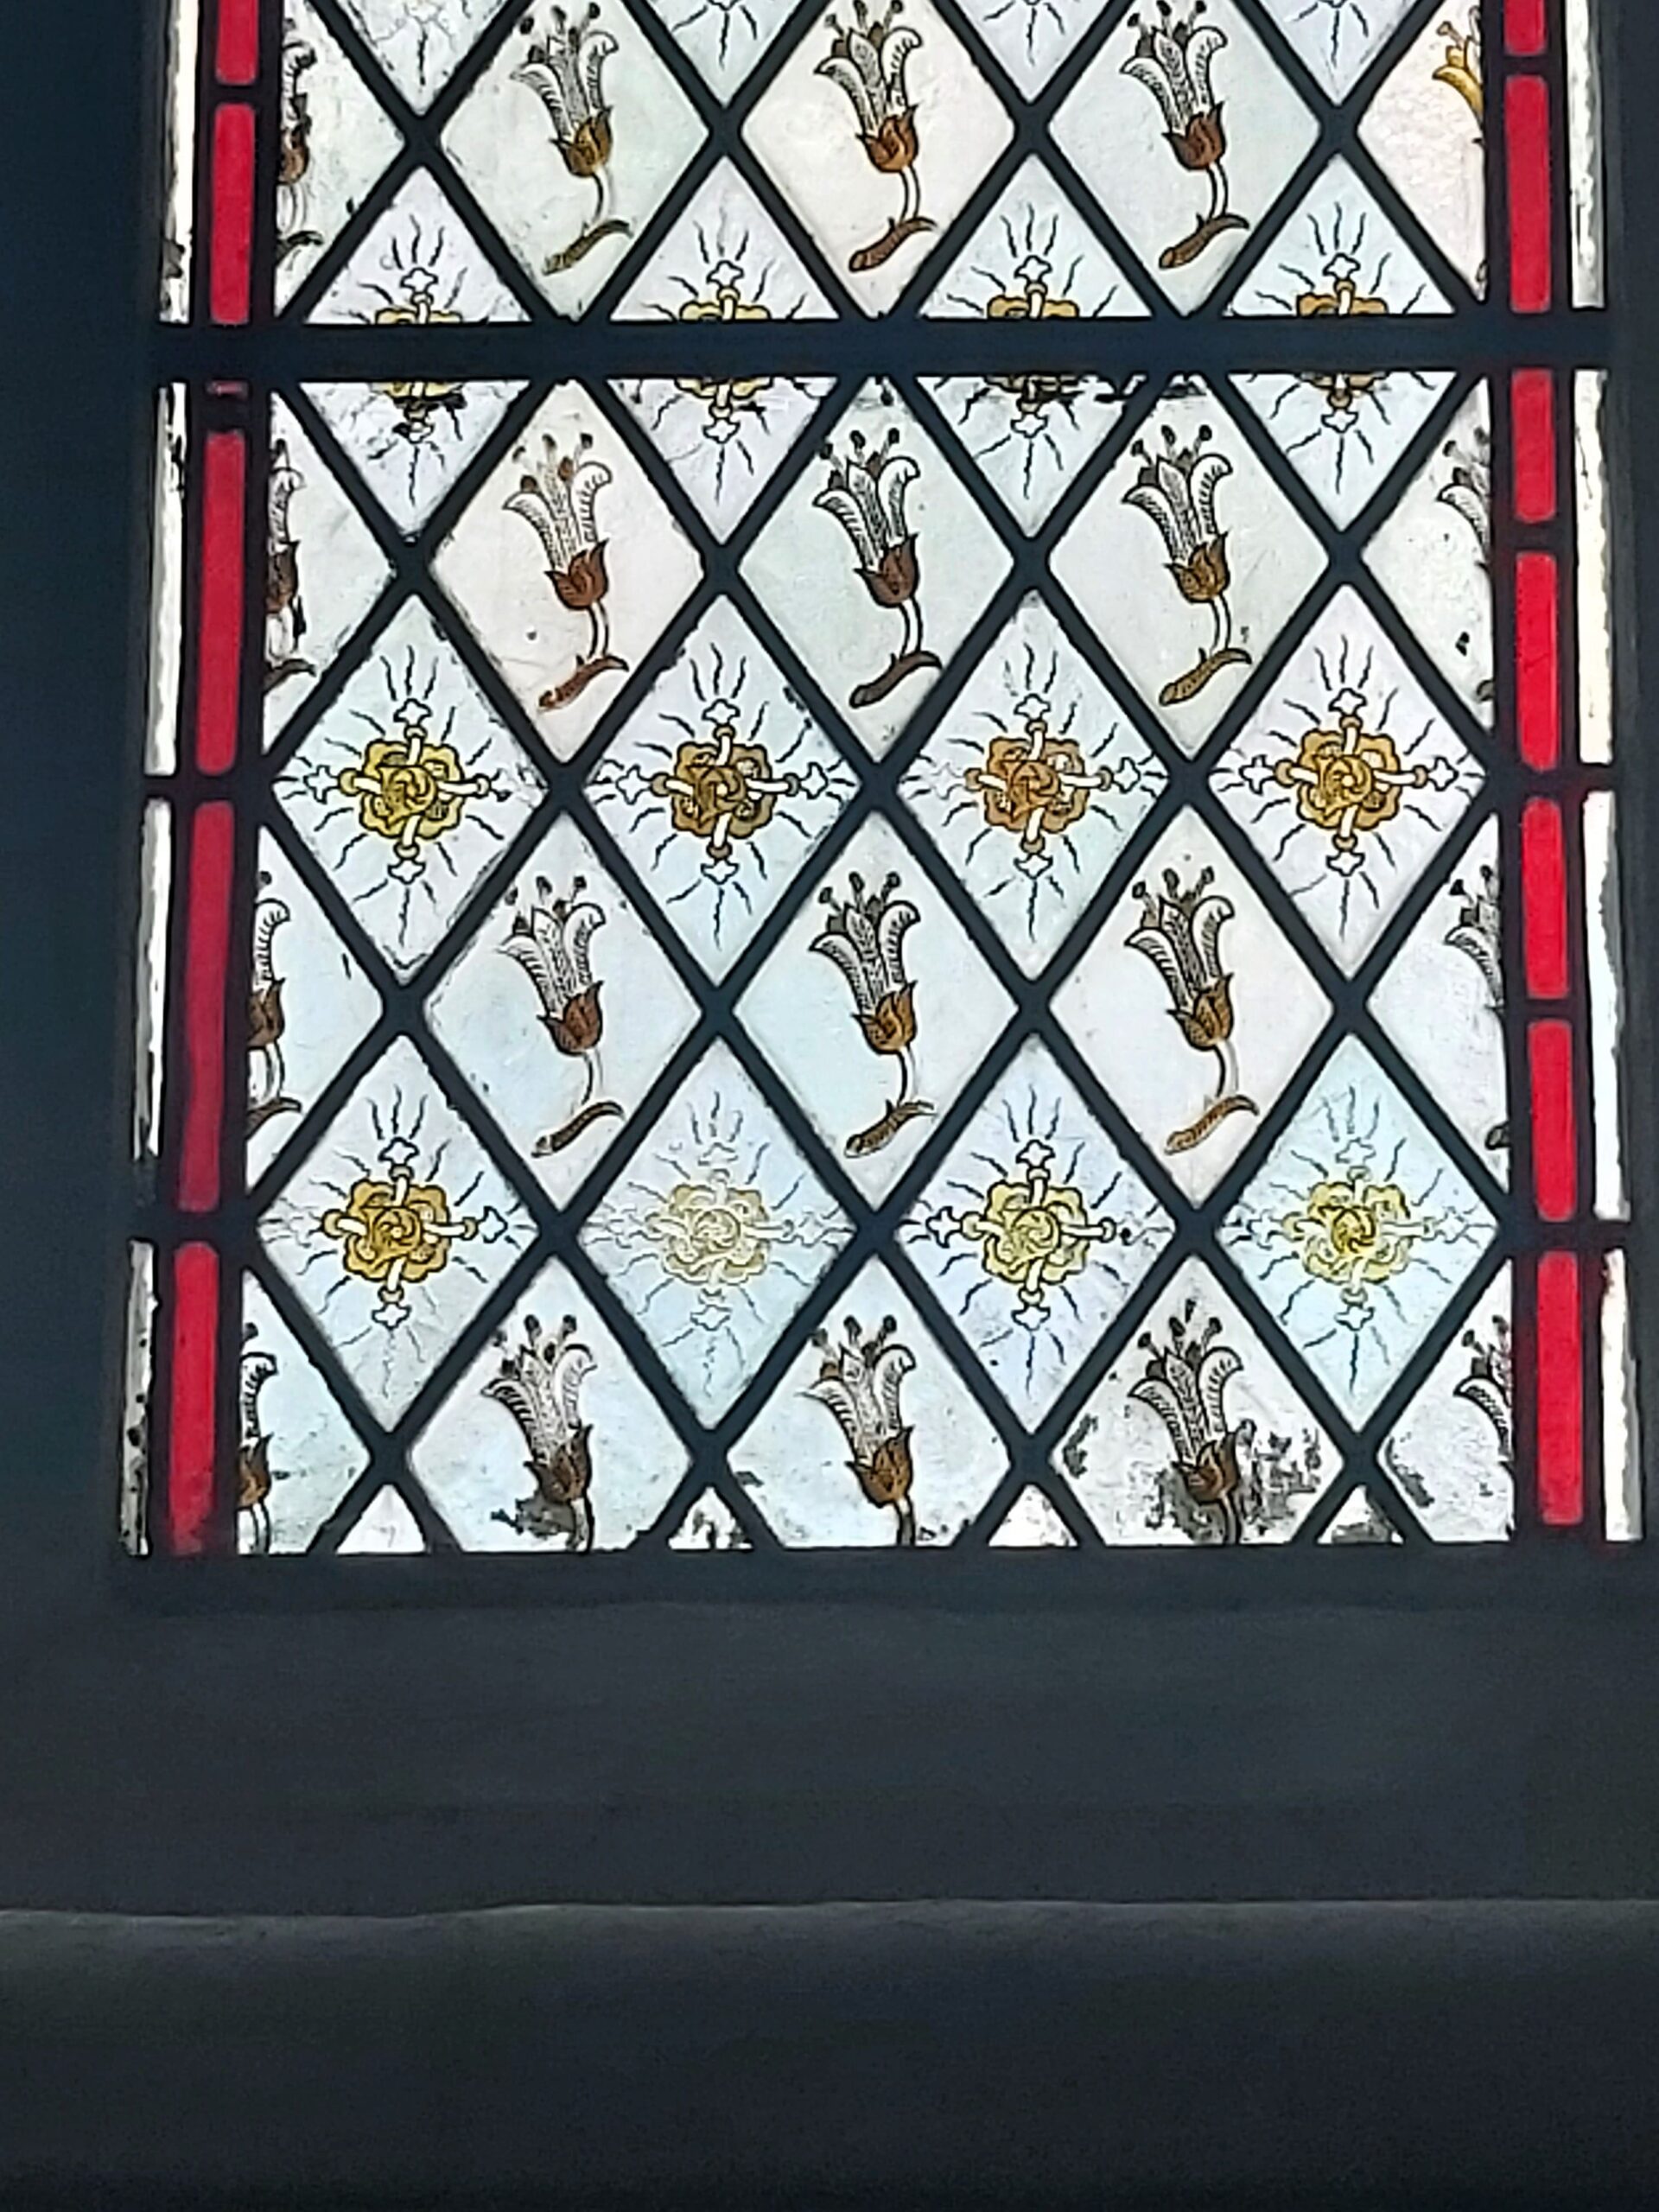 Small flowers and crosses pattern on a stained glass window in St Mary's Church, Ware, England